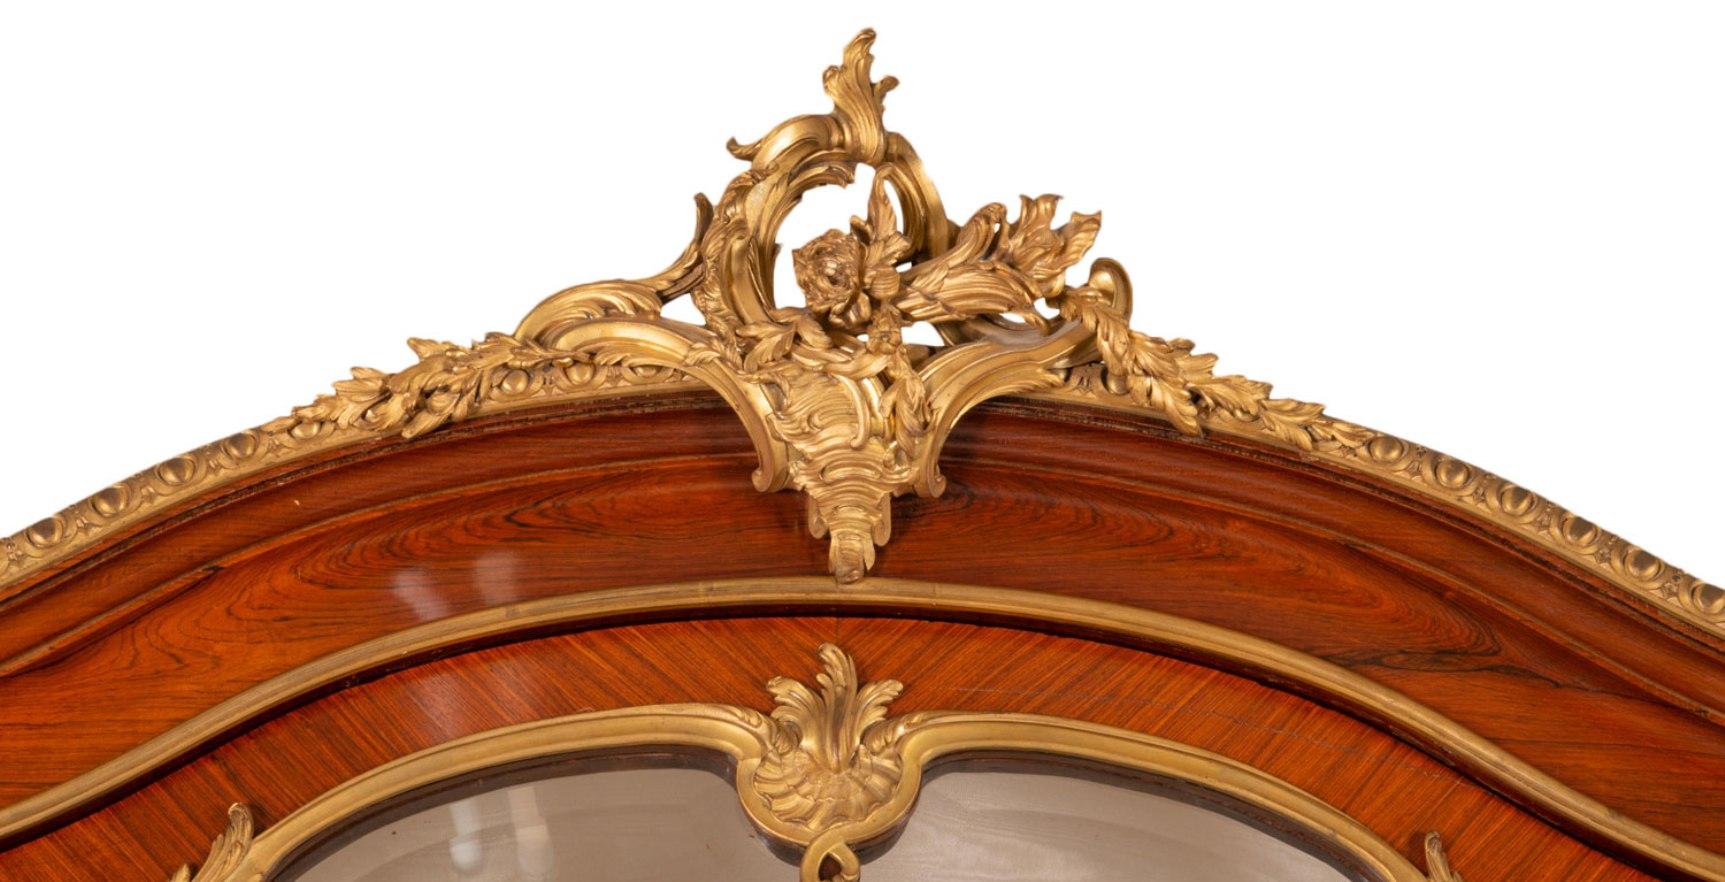 A very large and impressive fine quality 19th century French mahogany Virine, in the style of Louis XVI by 'Francoise Linke'.
Having wonderful gilded ormolu mounts of scrolling foliage, egg and dart moldings and classical females with head dresses.